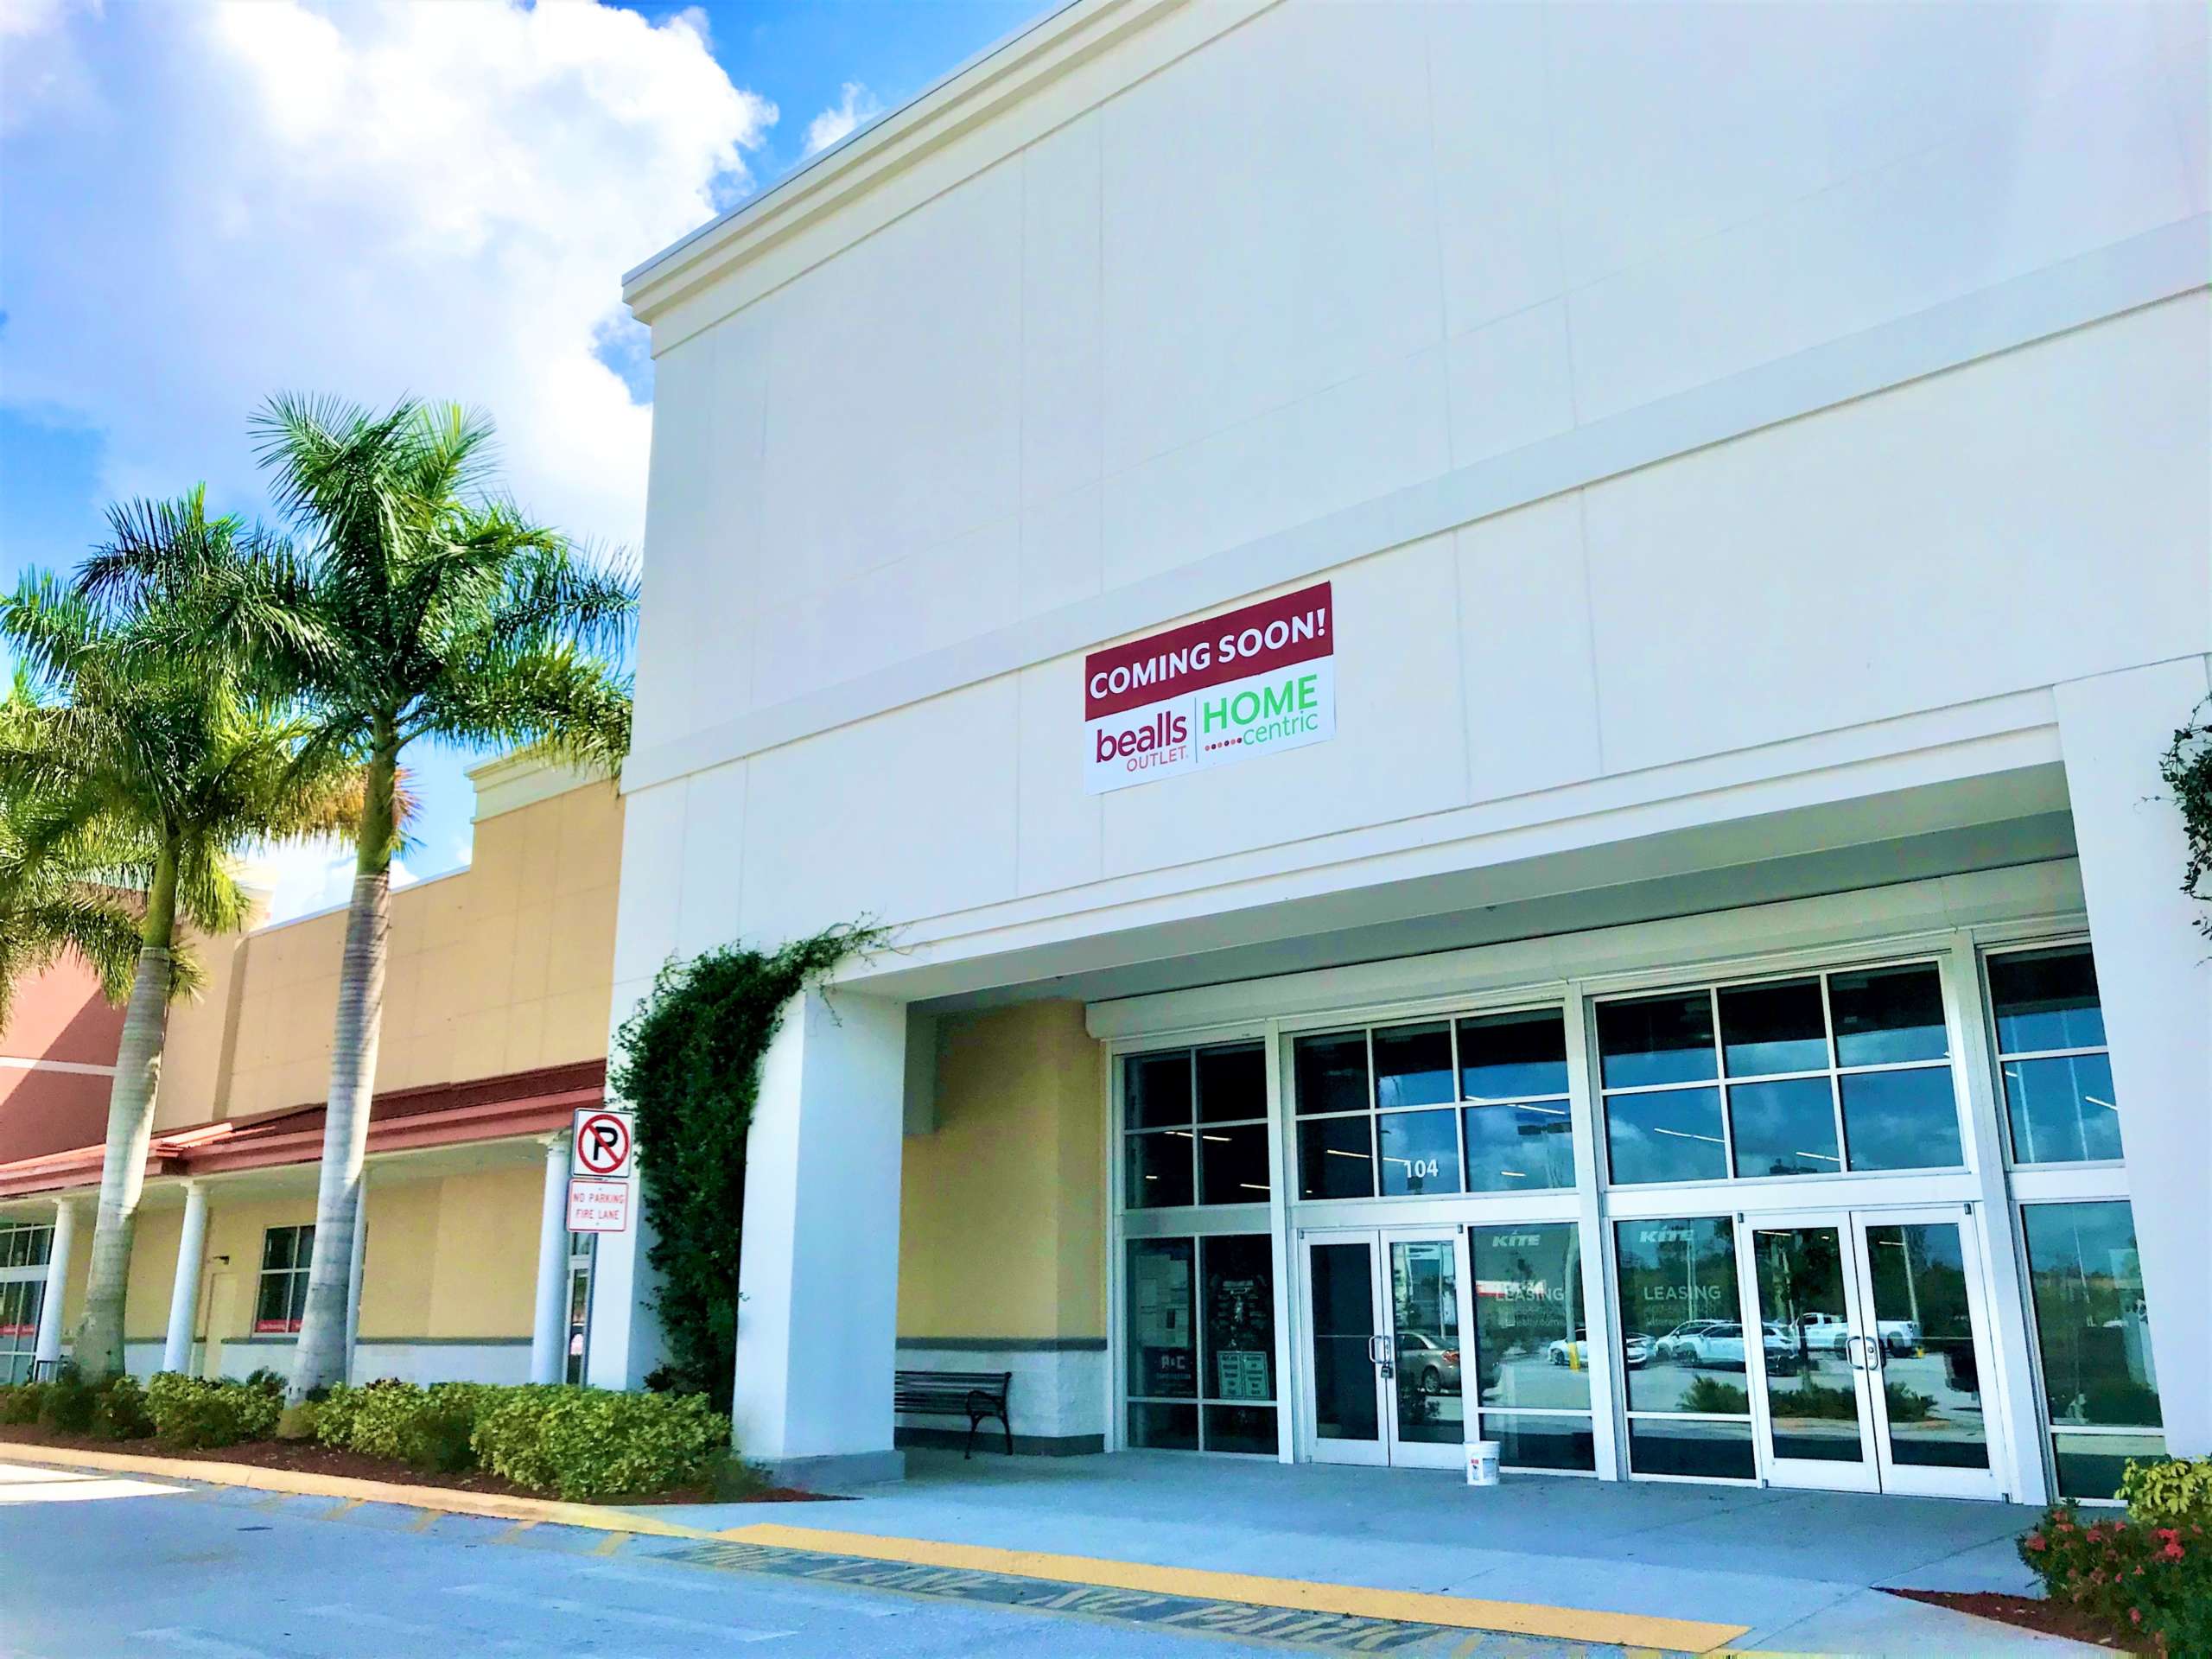 https://www.gulfshorebusiness.com/wp-content/uploads/2021/11/Bealls-Outlet-scaled.jpg